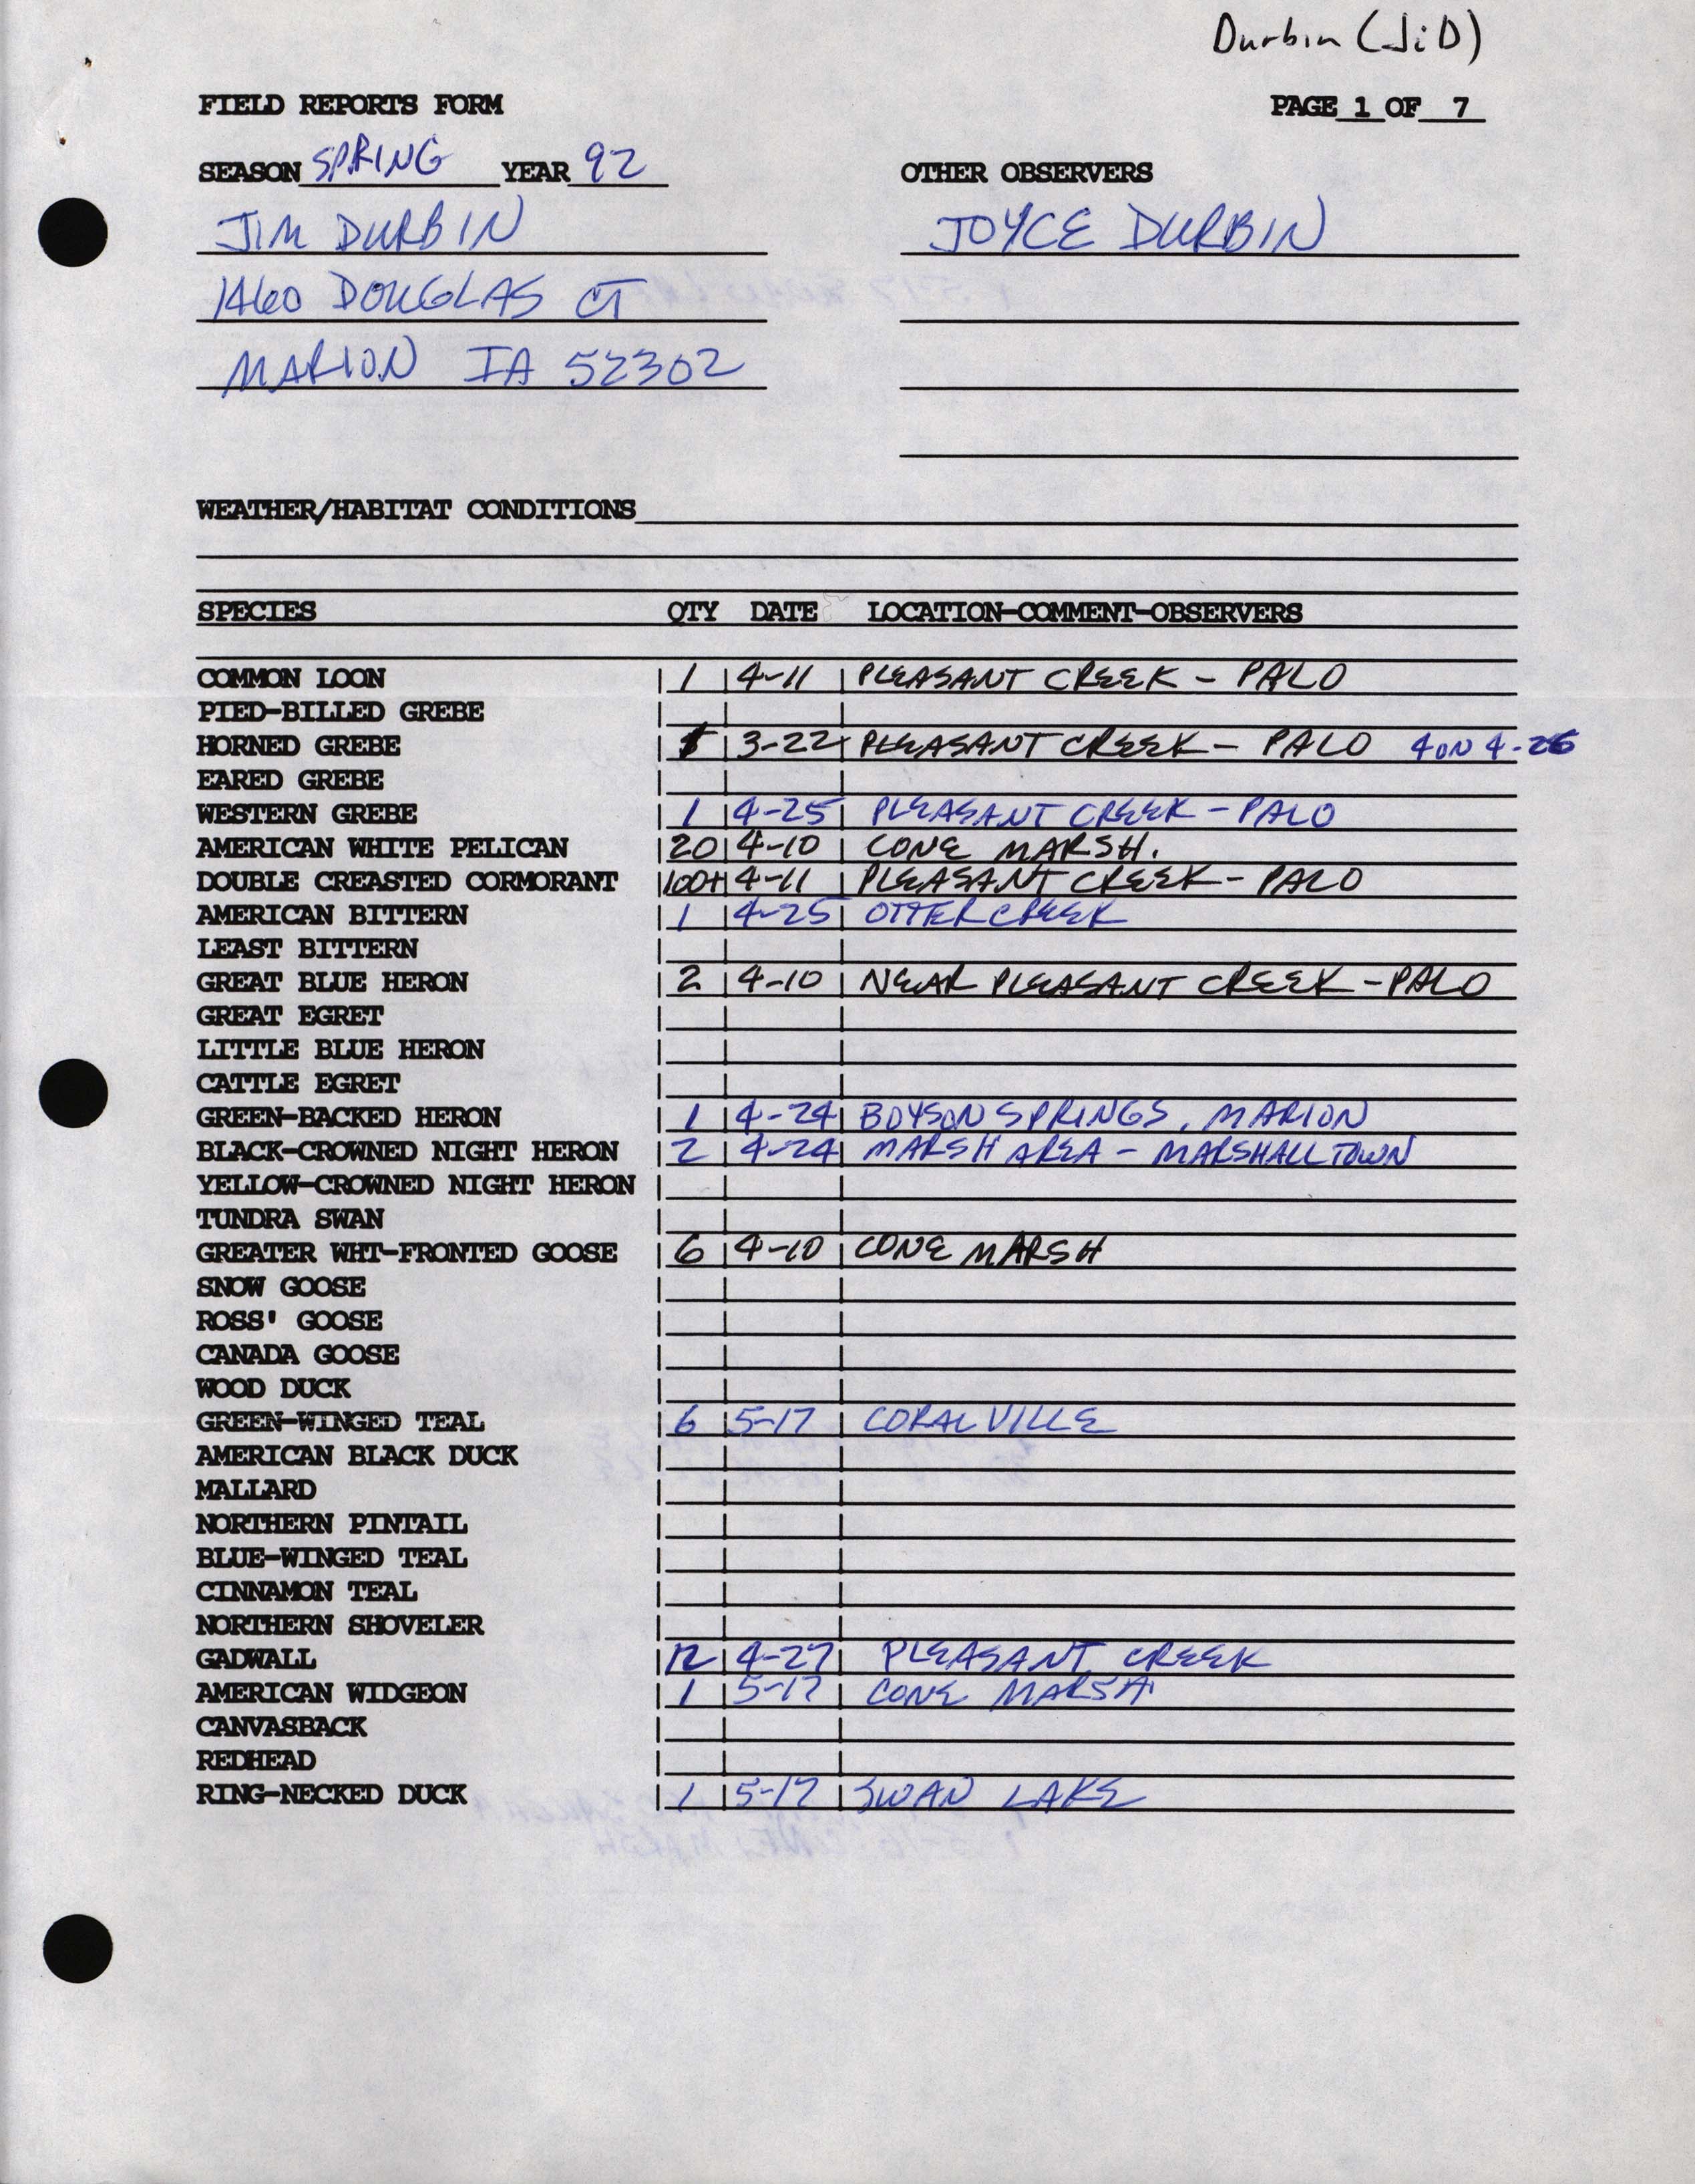 Field notes contributed by James O. Durbin, spring 1992